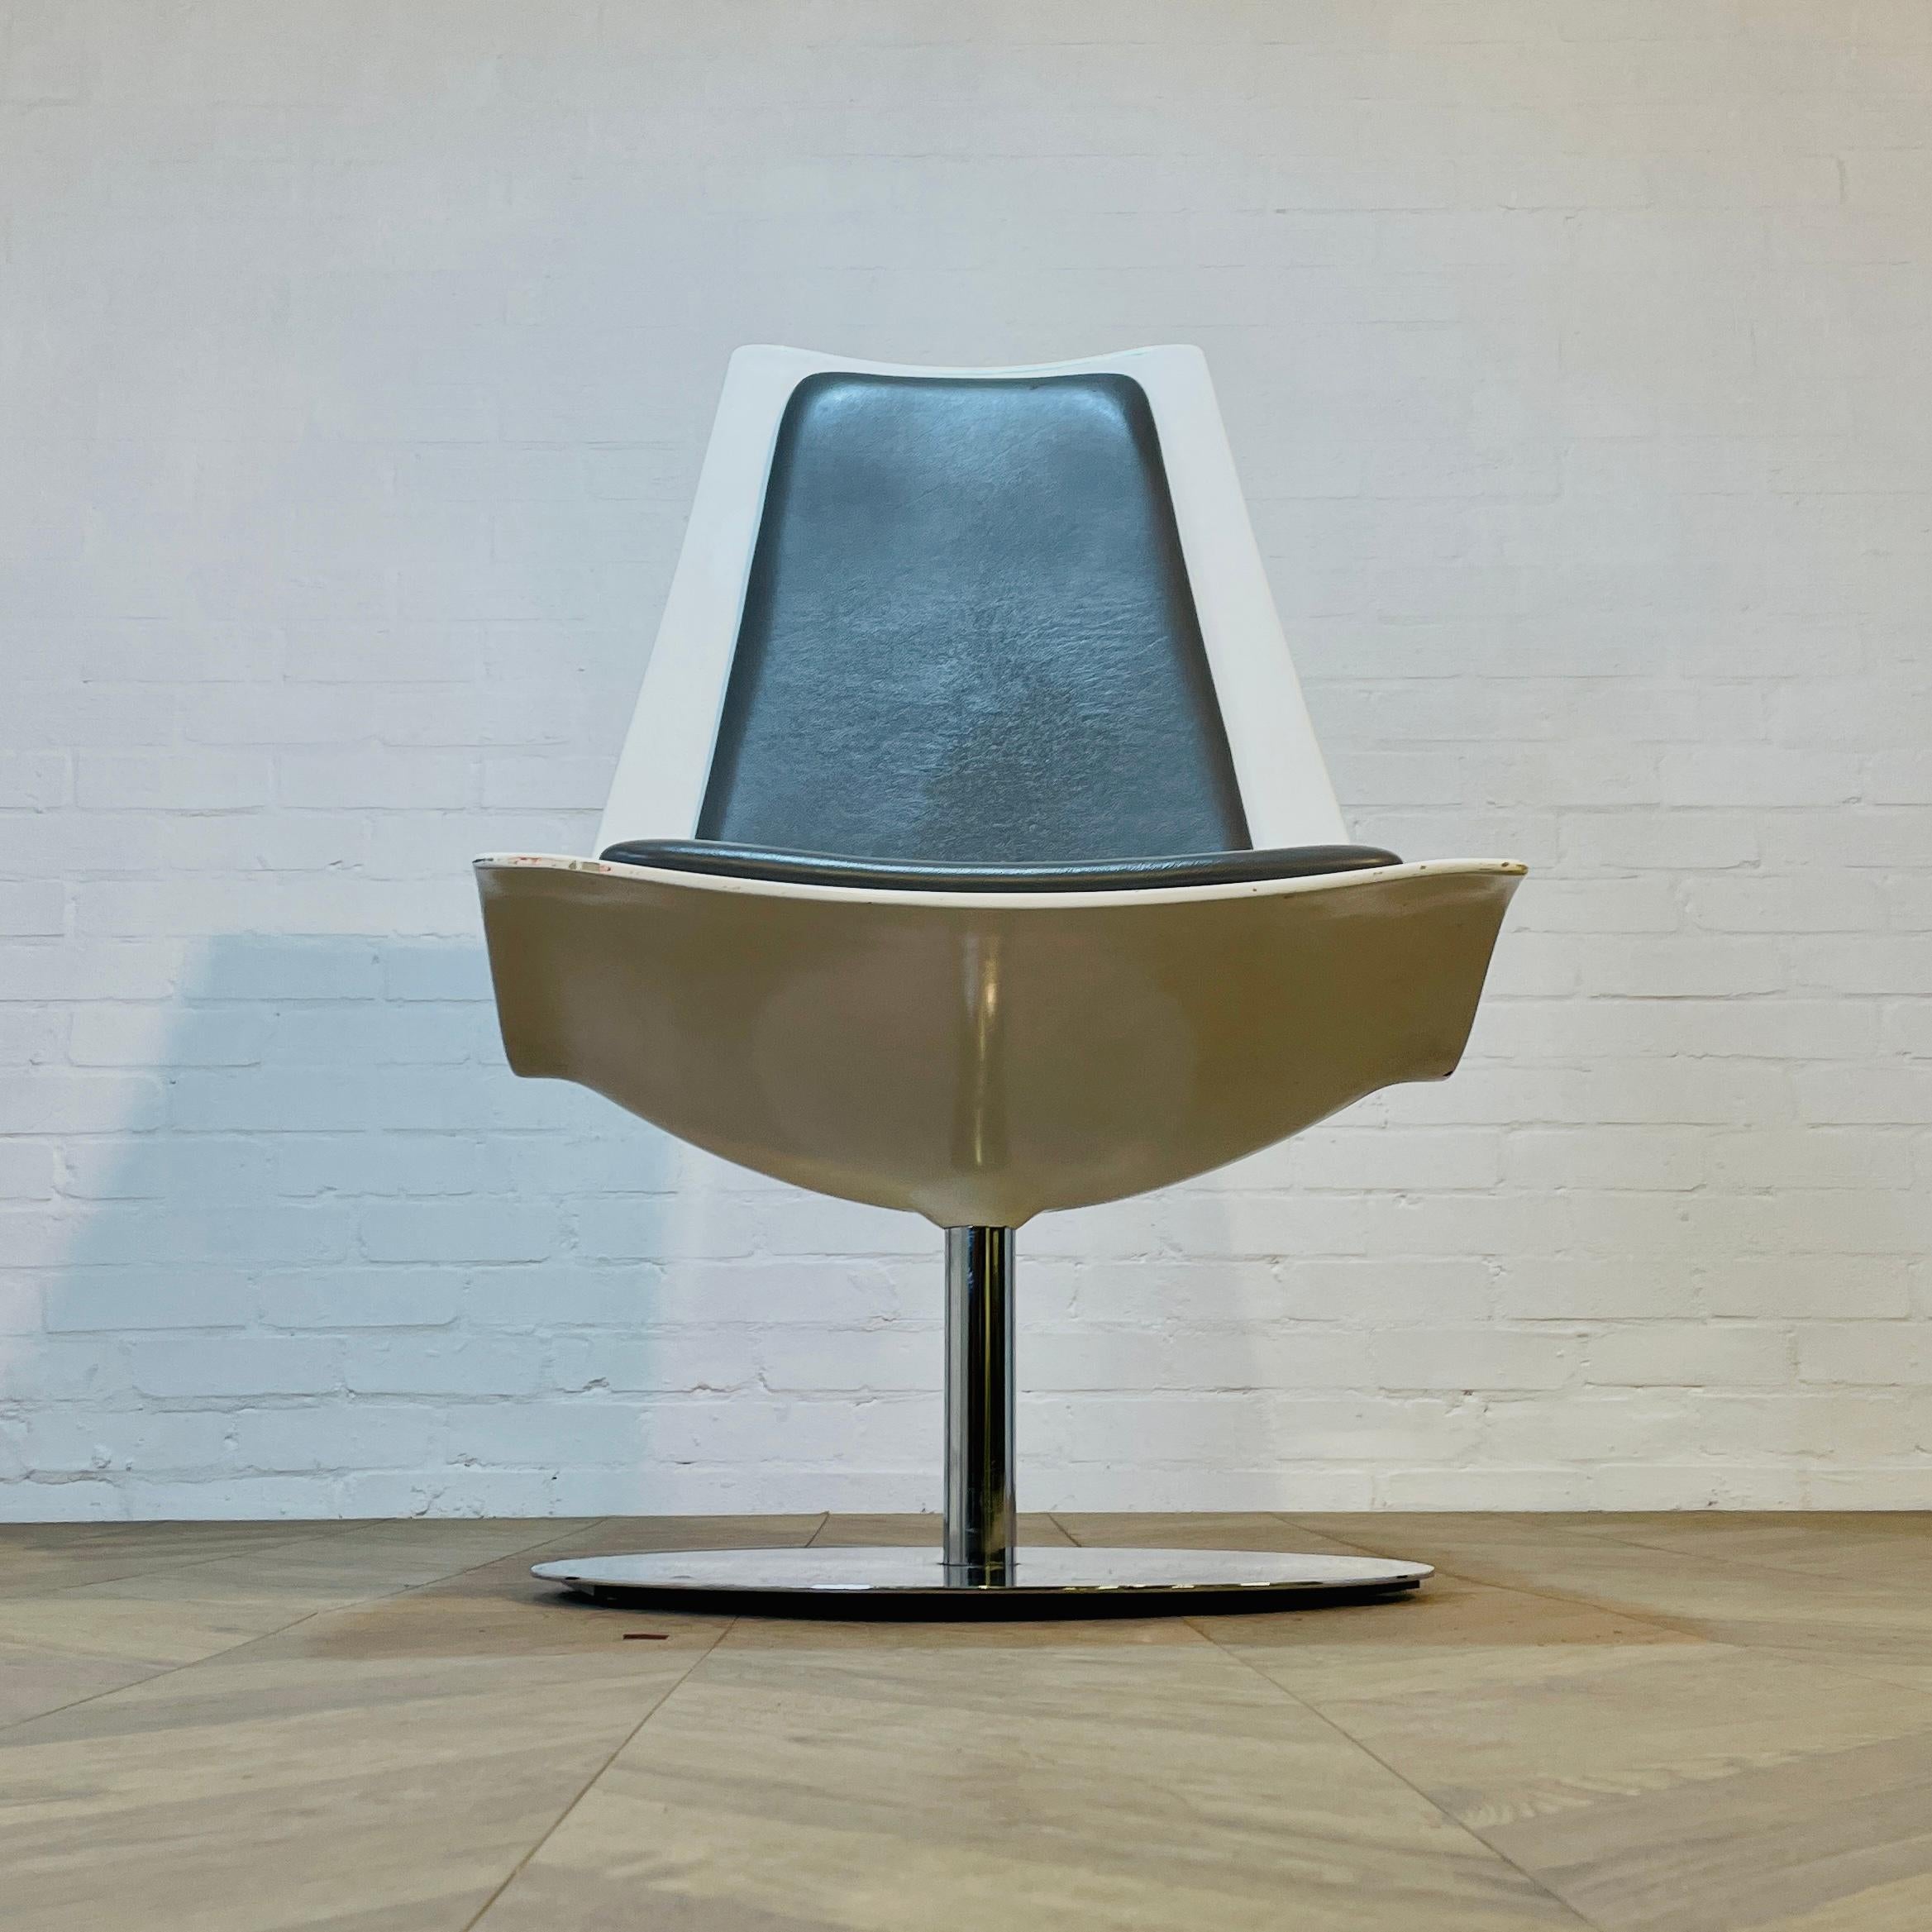 Vintage XPO Swivel Chair by BO Concept on Chrome Base.

The chair, which is super heavy, boasts faux grey leather seat pads and a white hard shell, which is in good vintage condition, with slight marks and scuffs to the frame, in-keeping with their